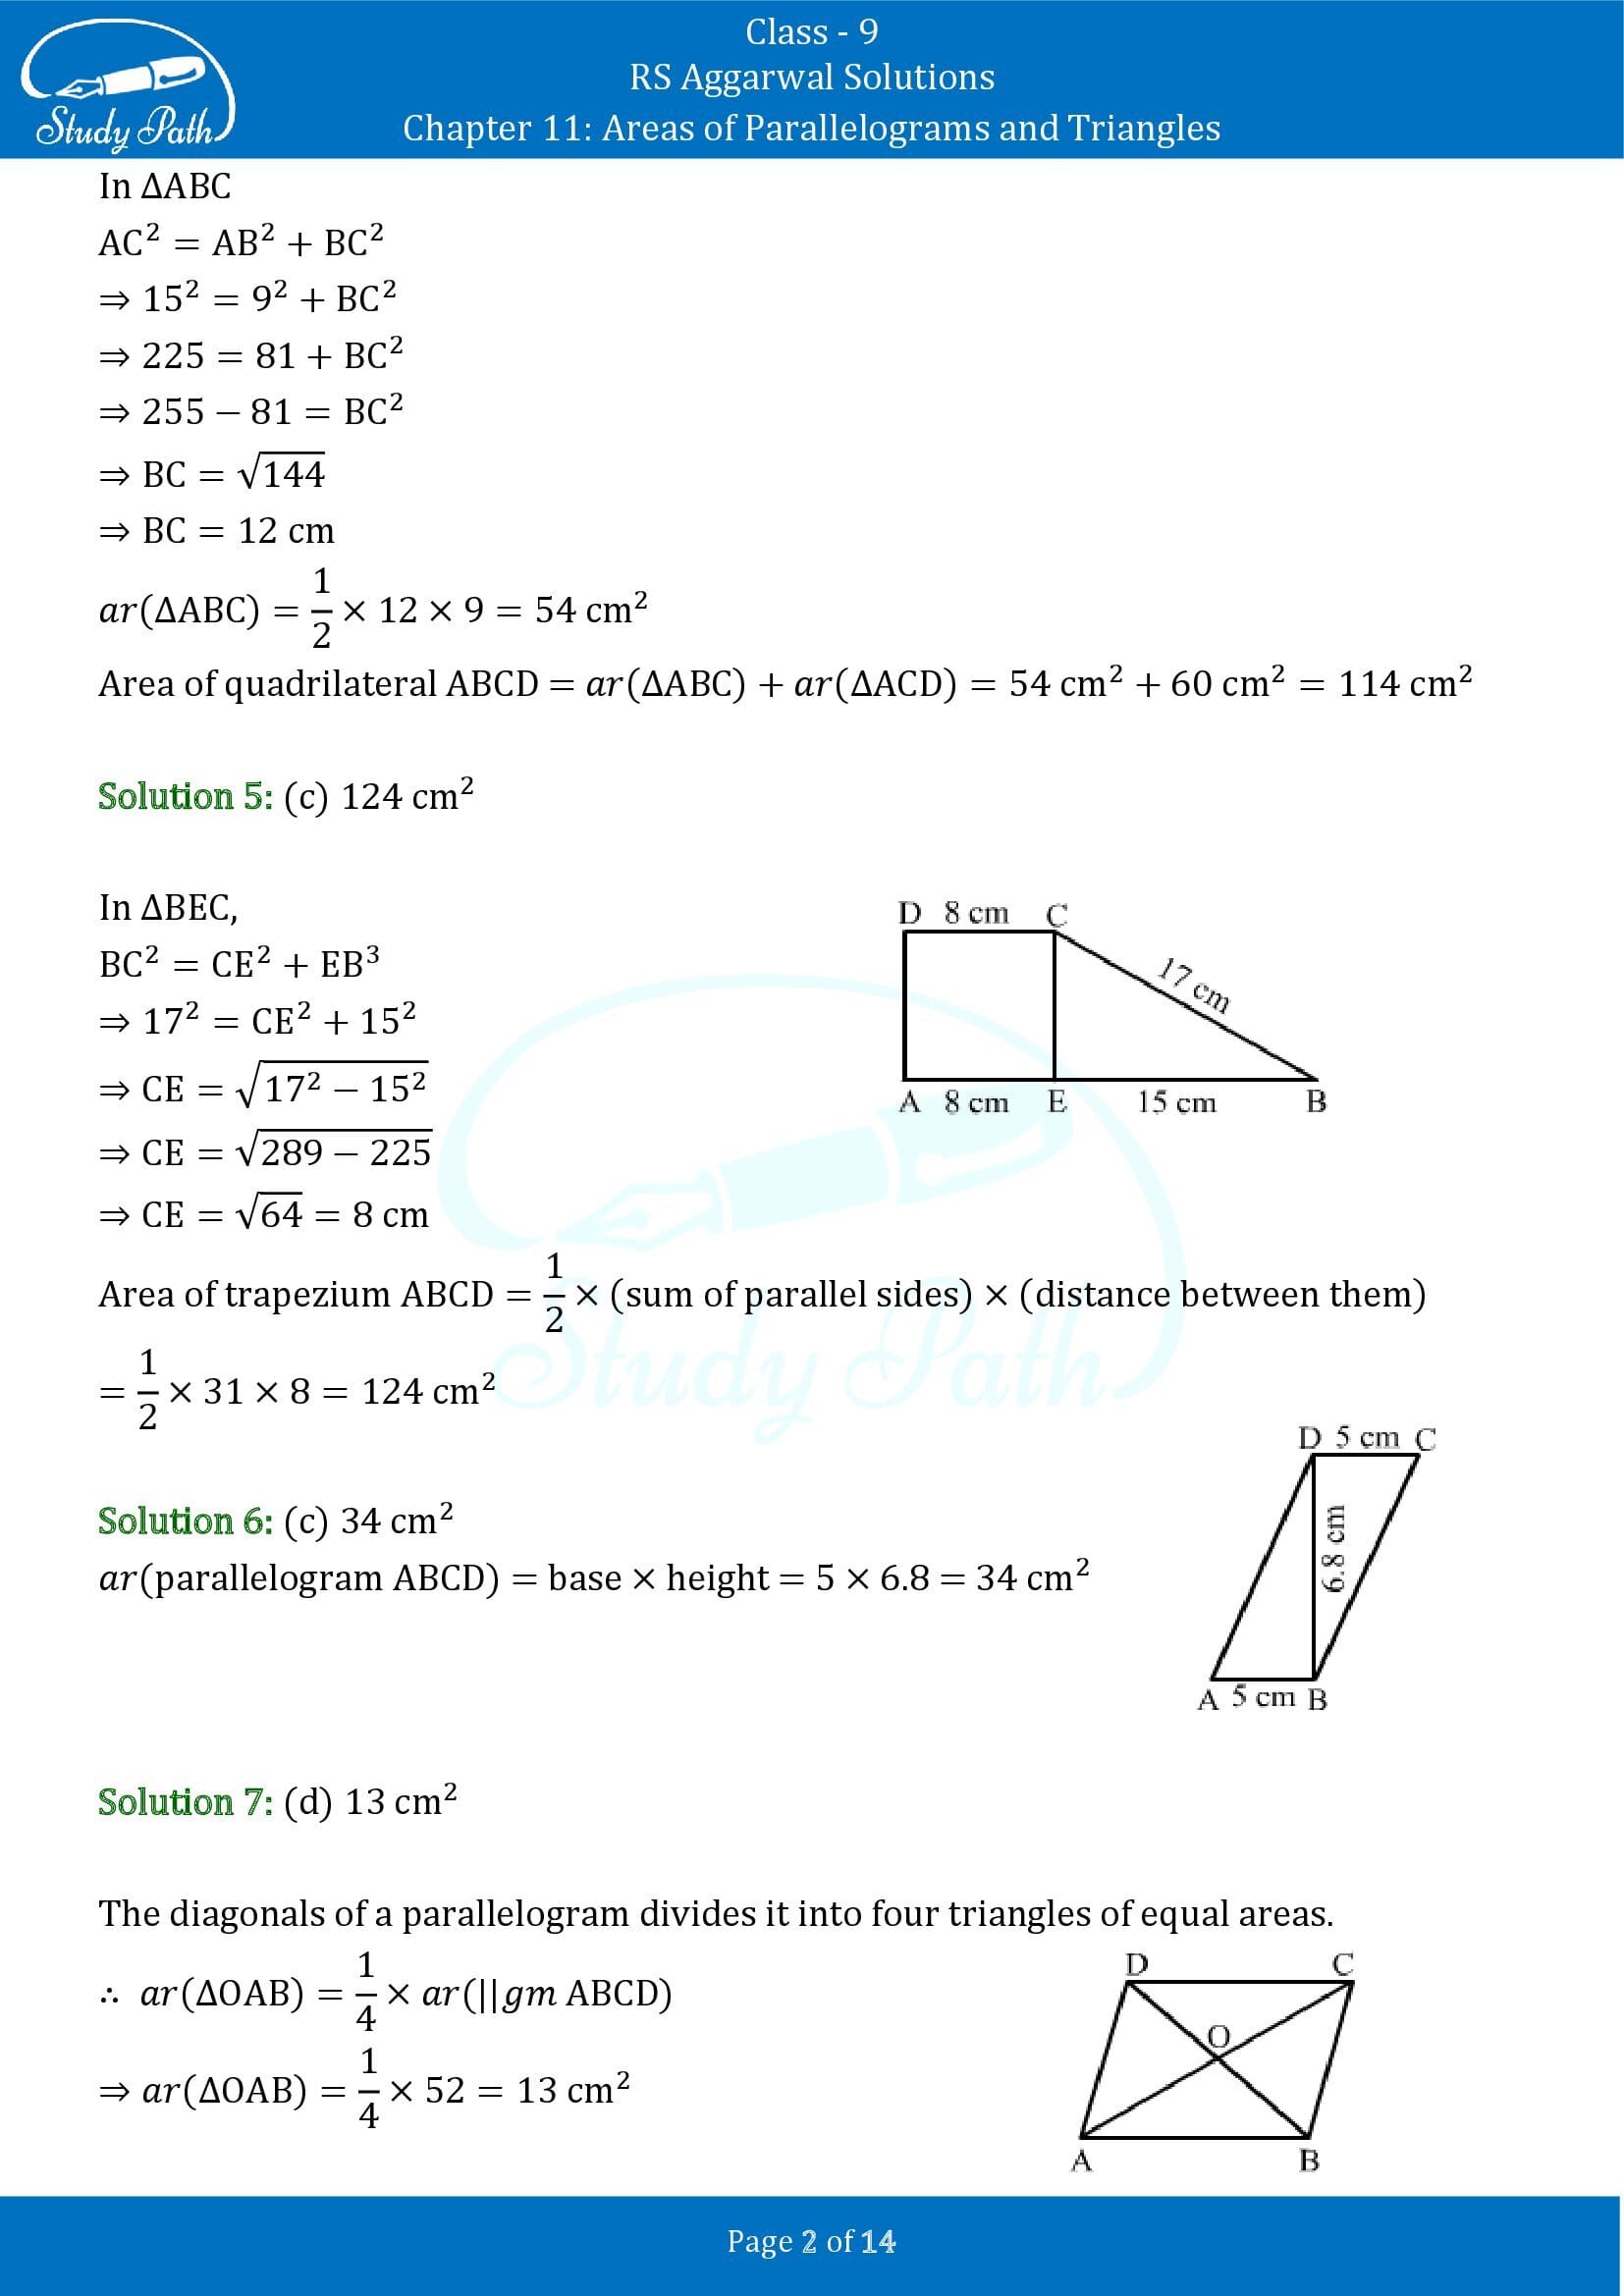 RS Aggarwal Solutions Class 9 Chapter 11 Areas of Parallelograms and Triangles Multiple Choice Questions MCQs 00002